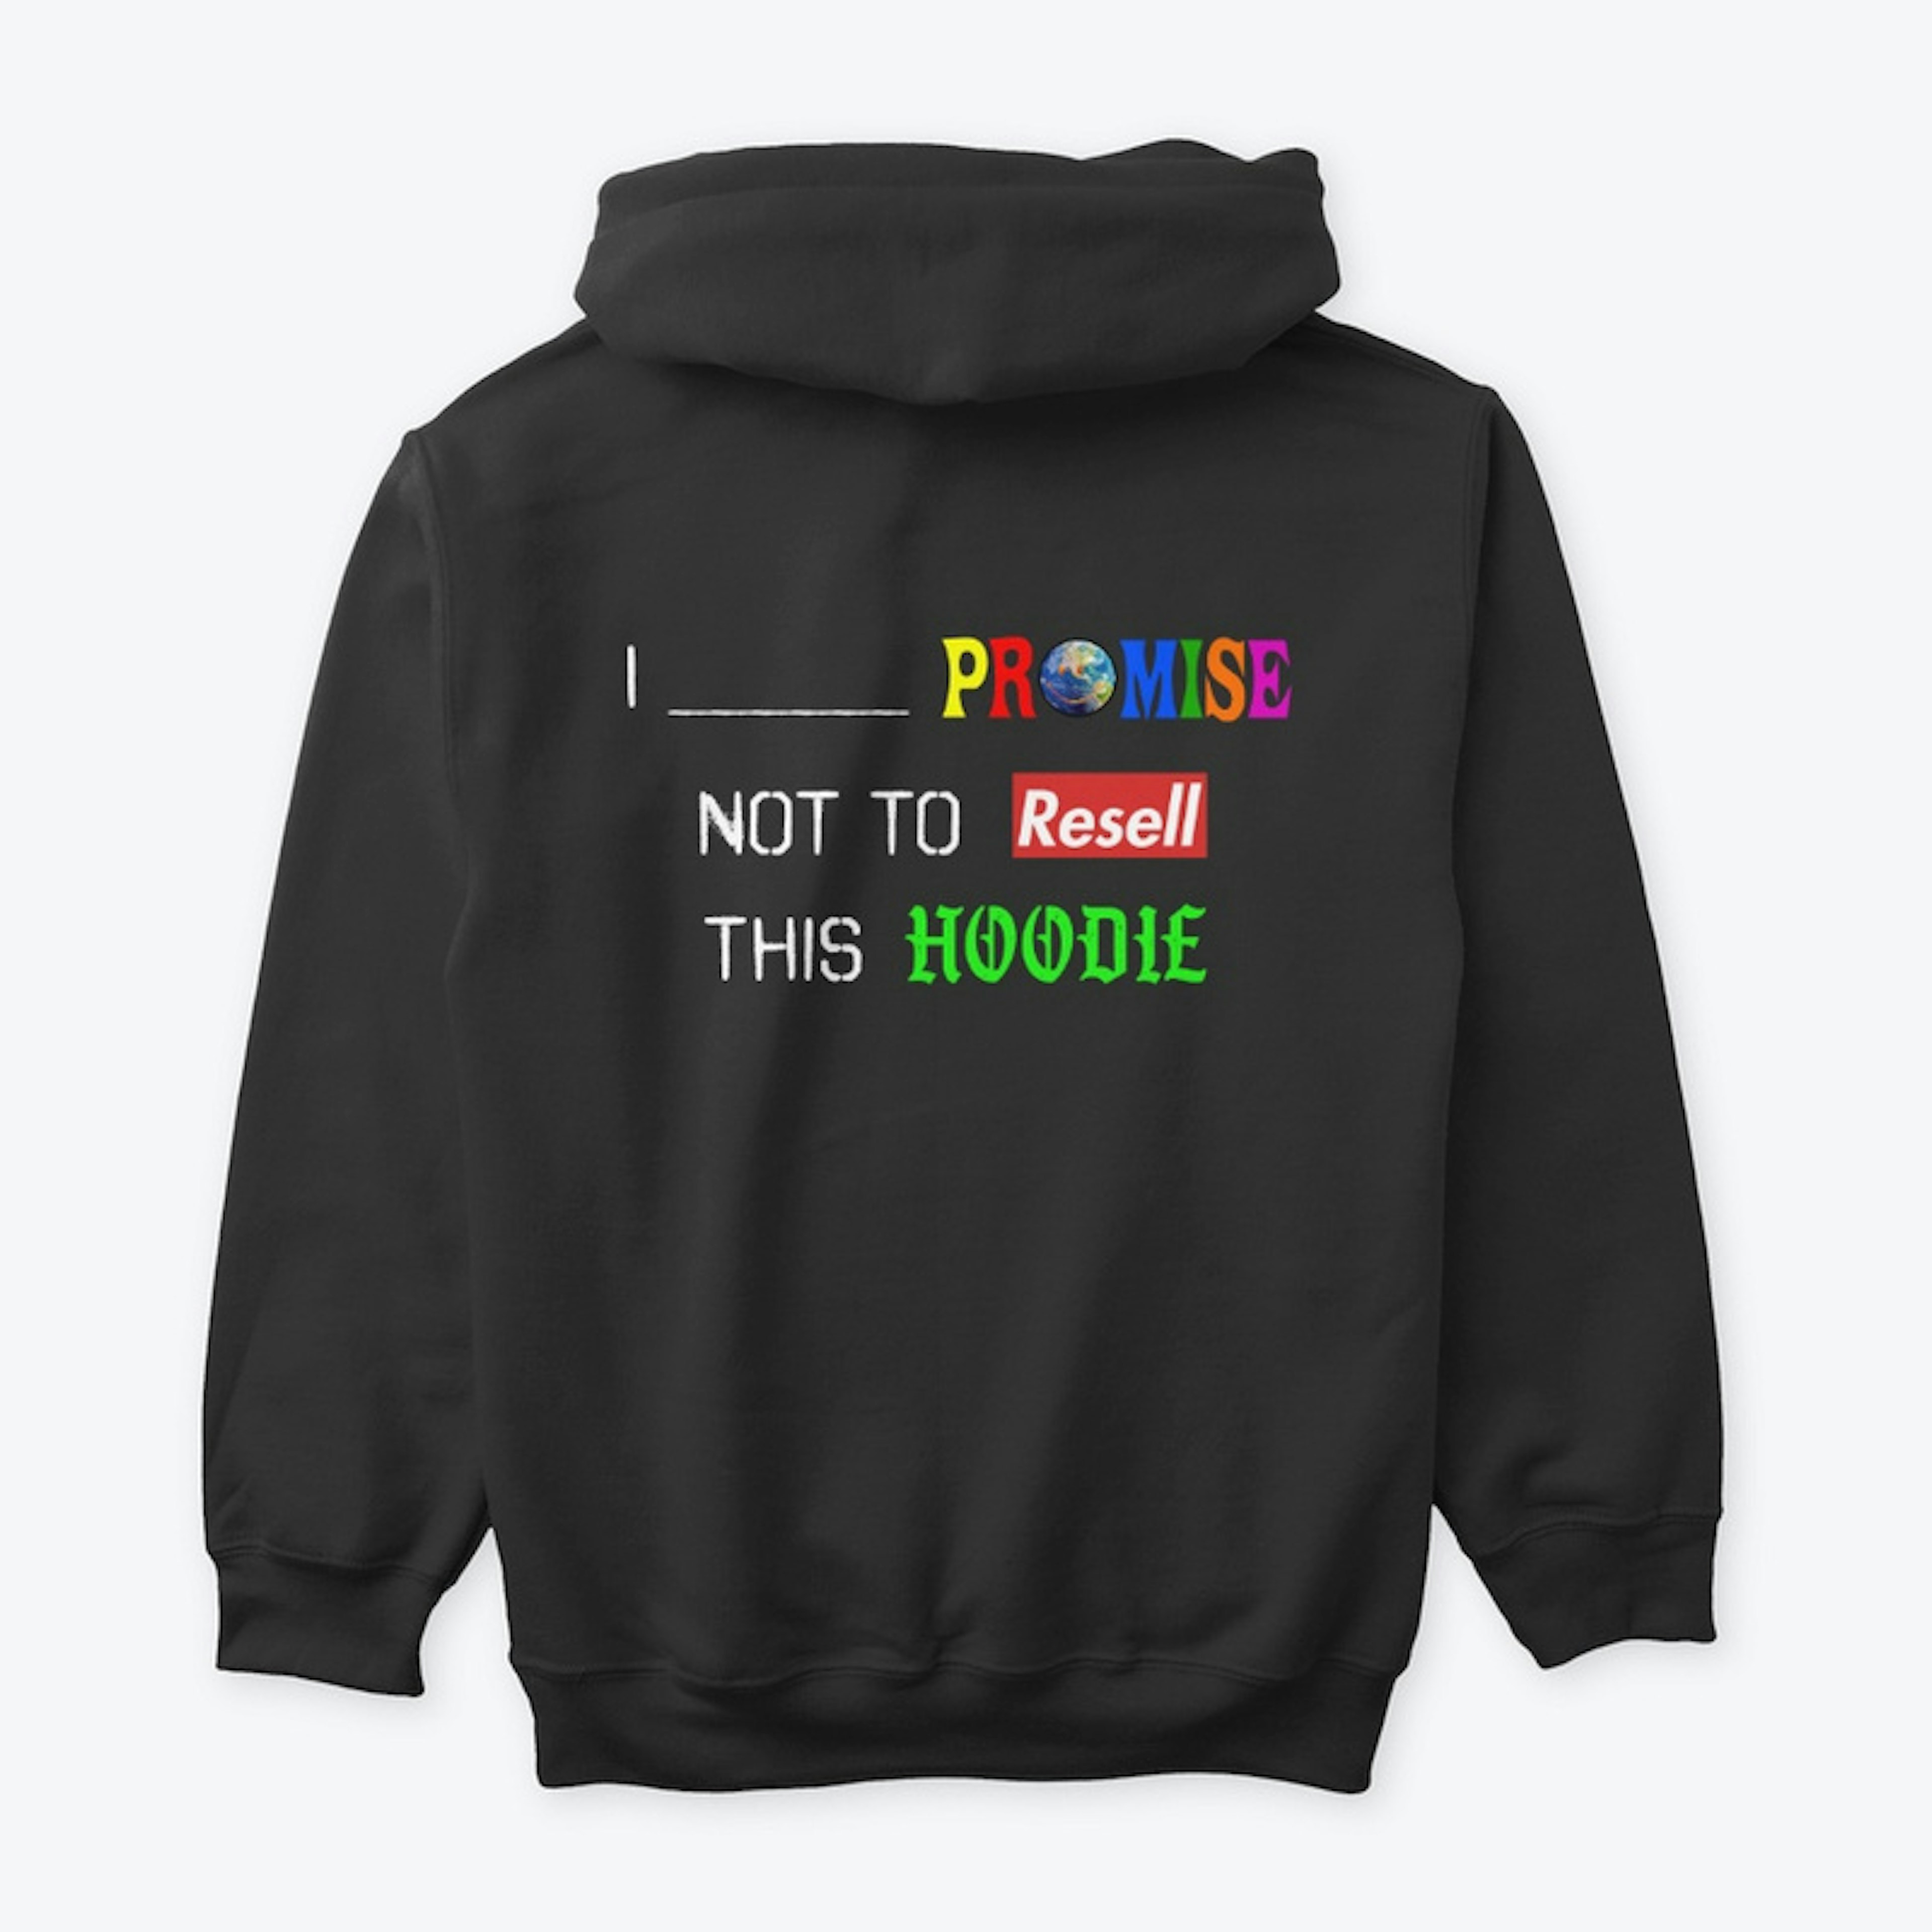 The I Promise Hoodie